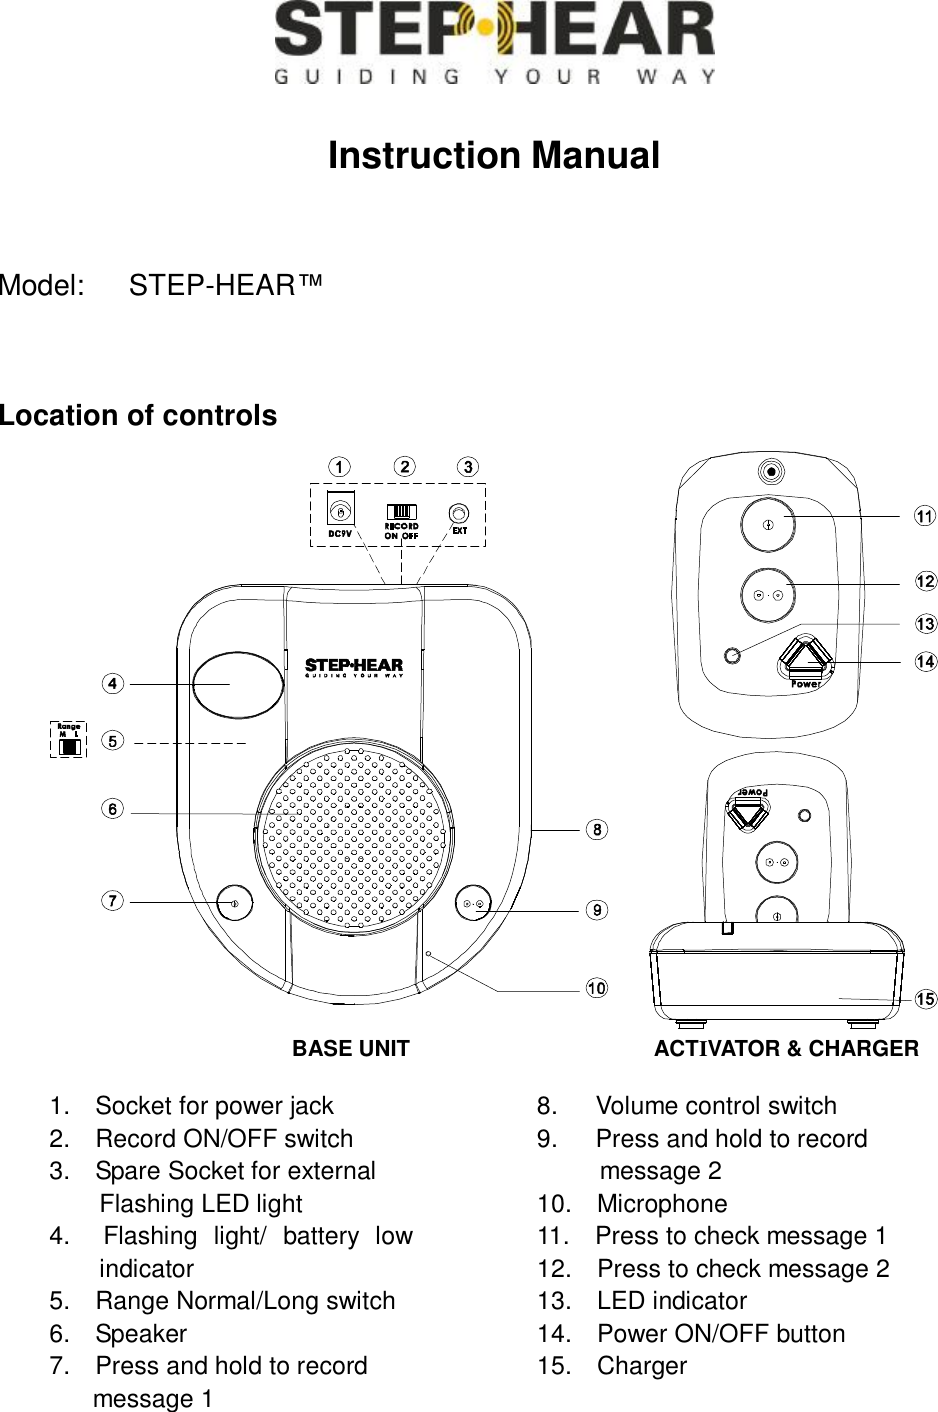   Instruction Manual  Model:  STEP-HEAR™   Location of controls   BASE UNIT              ACTIVATOR &amp; CHARGER       1.  Socket for power jack 2.  Record ON/OFF switch 3.  Spare Socket for external     Flashing LED light 4.  Flashing light/ battery low indicator 5.  Range Normal/Long switch 6.  Speaker 7.  Press and hold to record message 1 8.   Volume control switch 9.   Press and hold to record       message 2 10.  Microphone 11.  Press to check message 1 12.  Press to check message 2 13.  LED indicator 14.  Power ON/OFF button 15.  Charger  